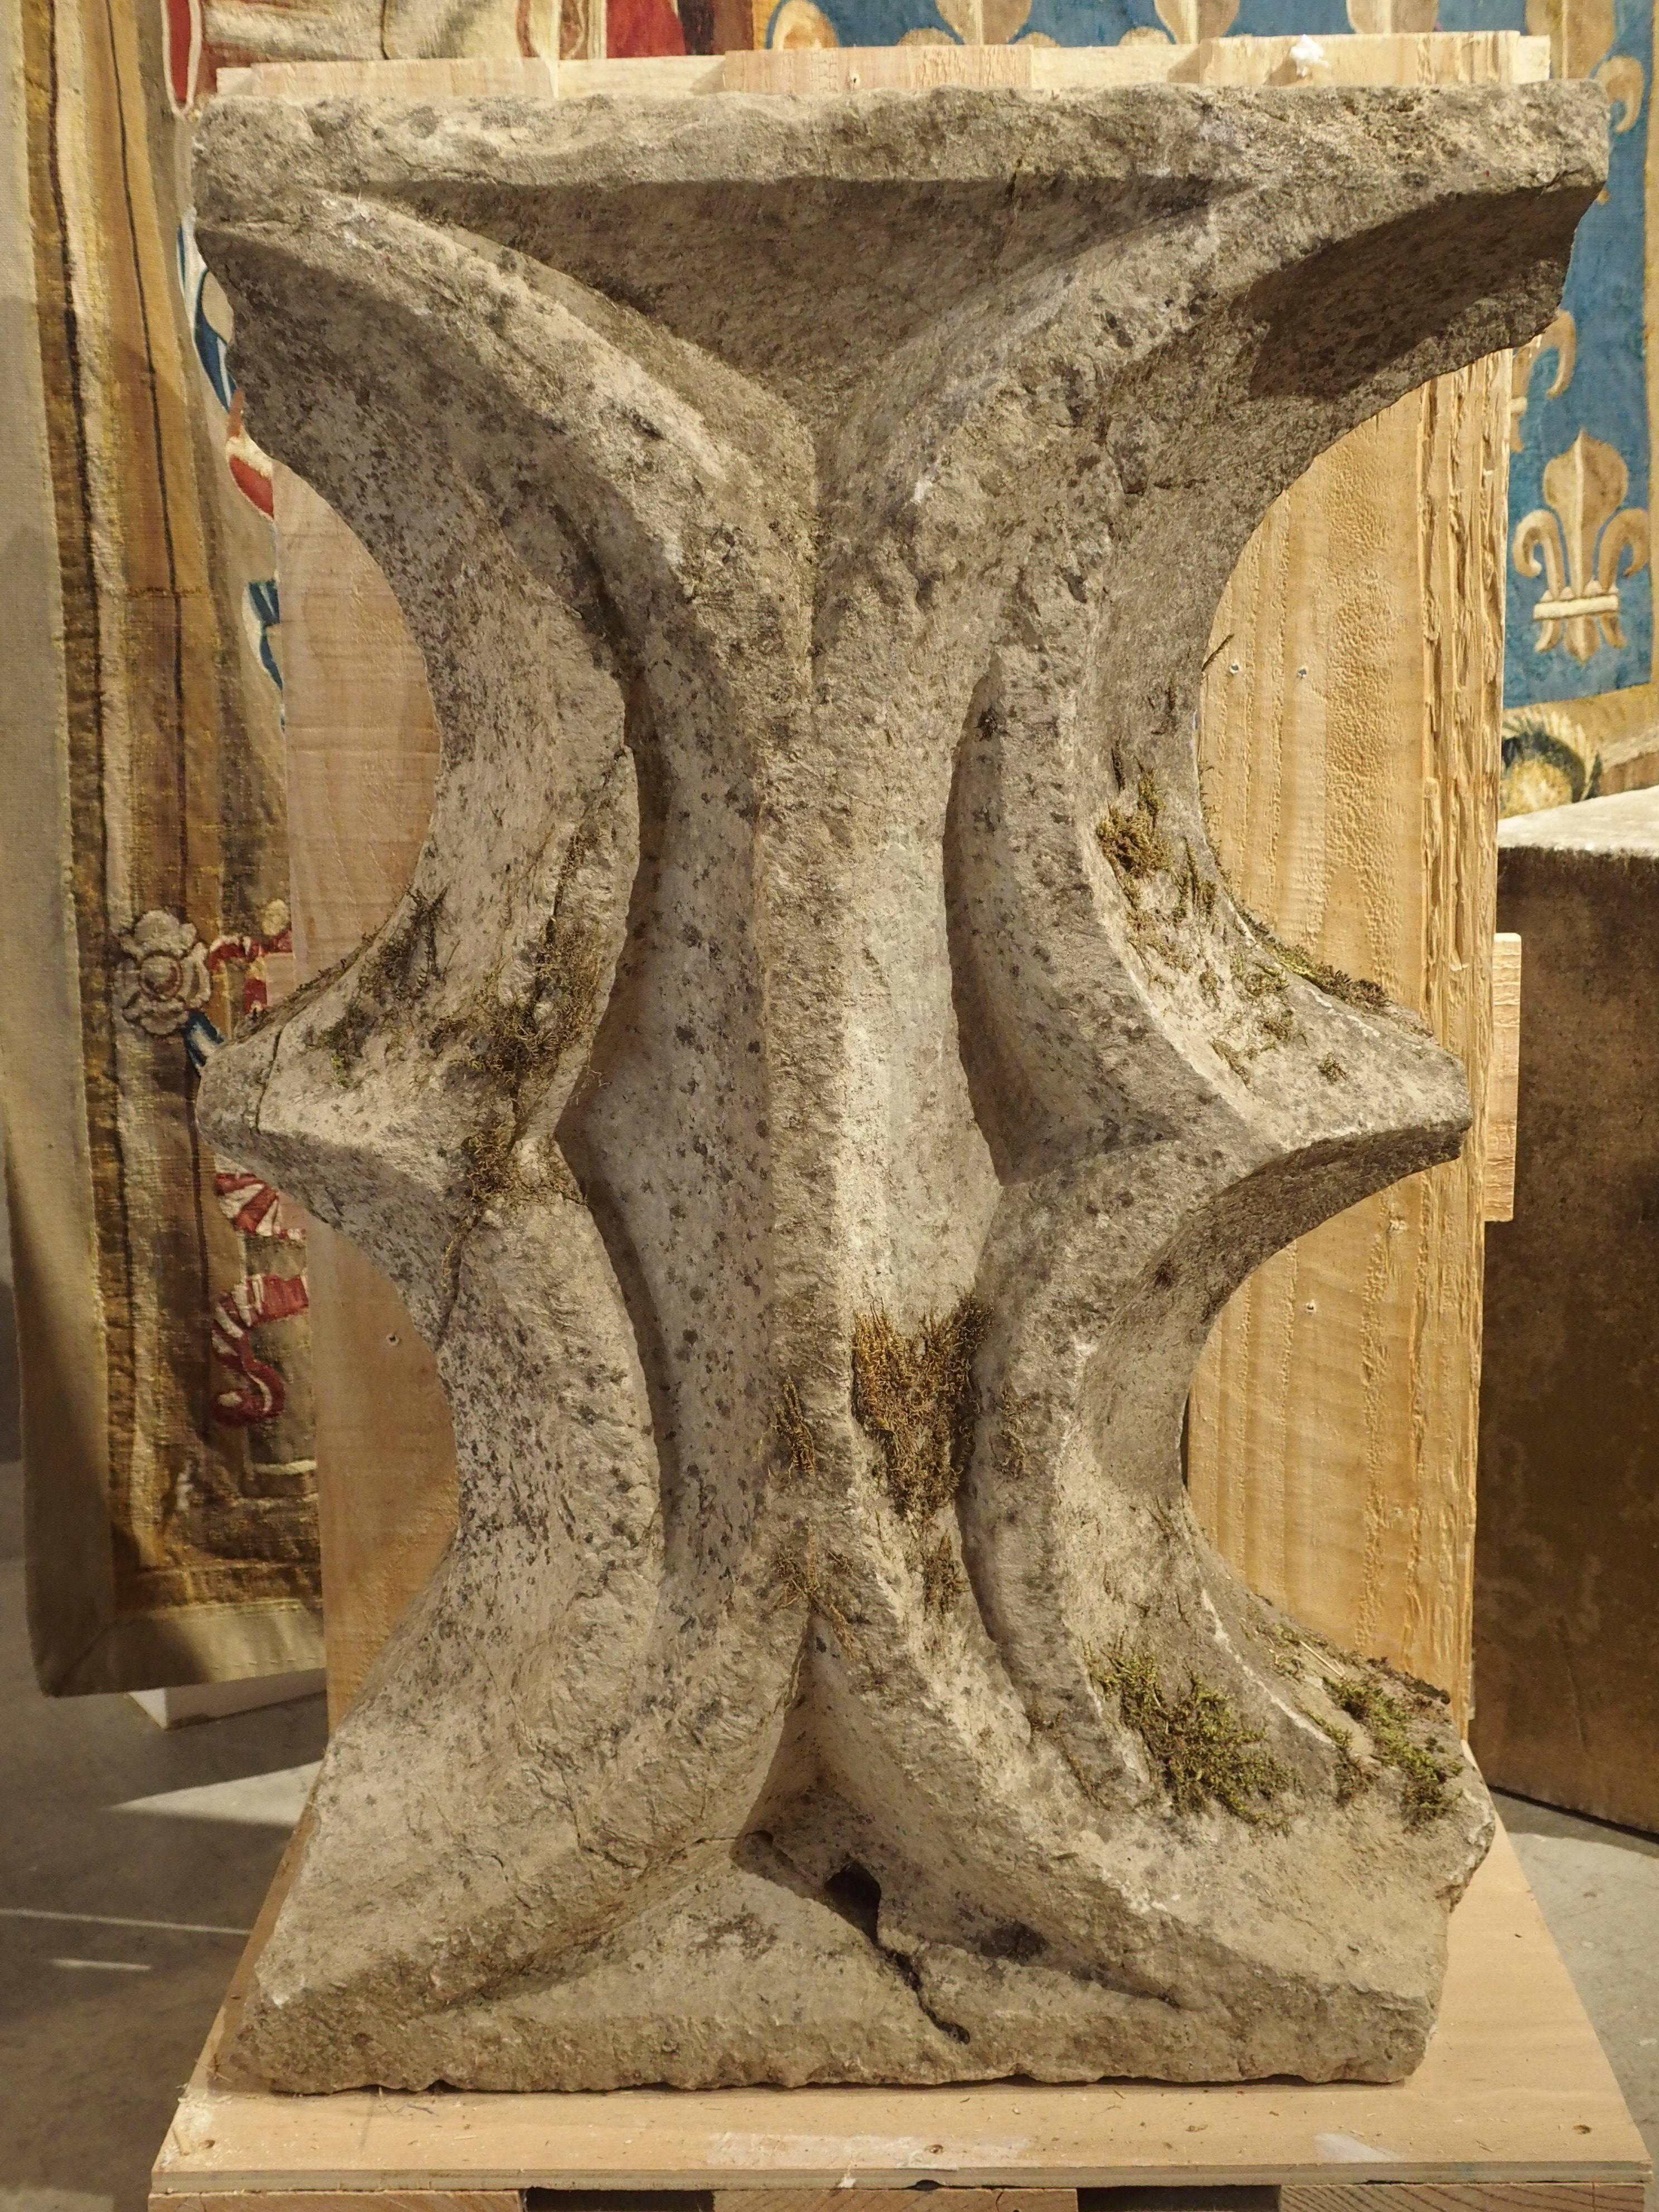 French Gothic Period Architectural Stone Fragment from France, 15th Century